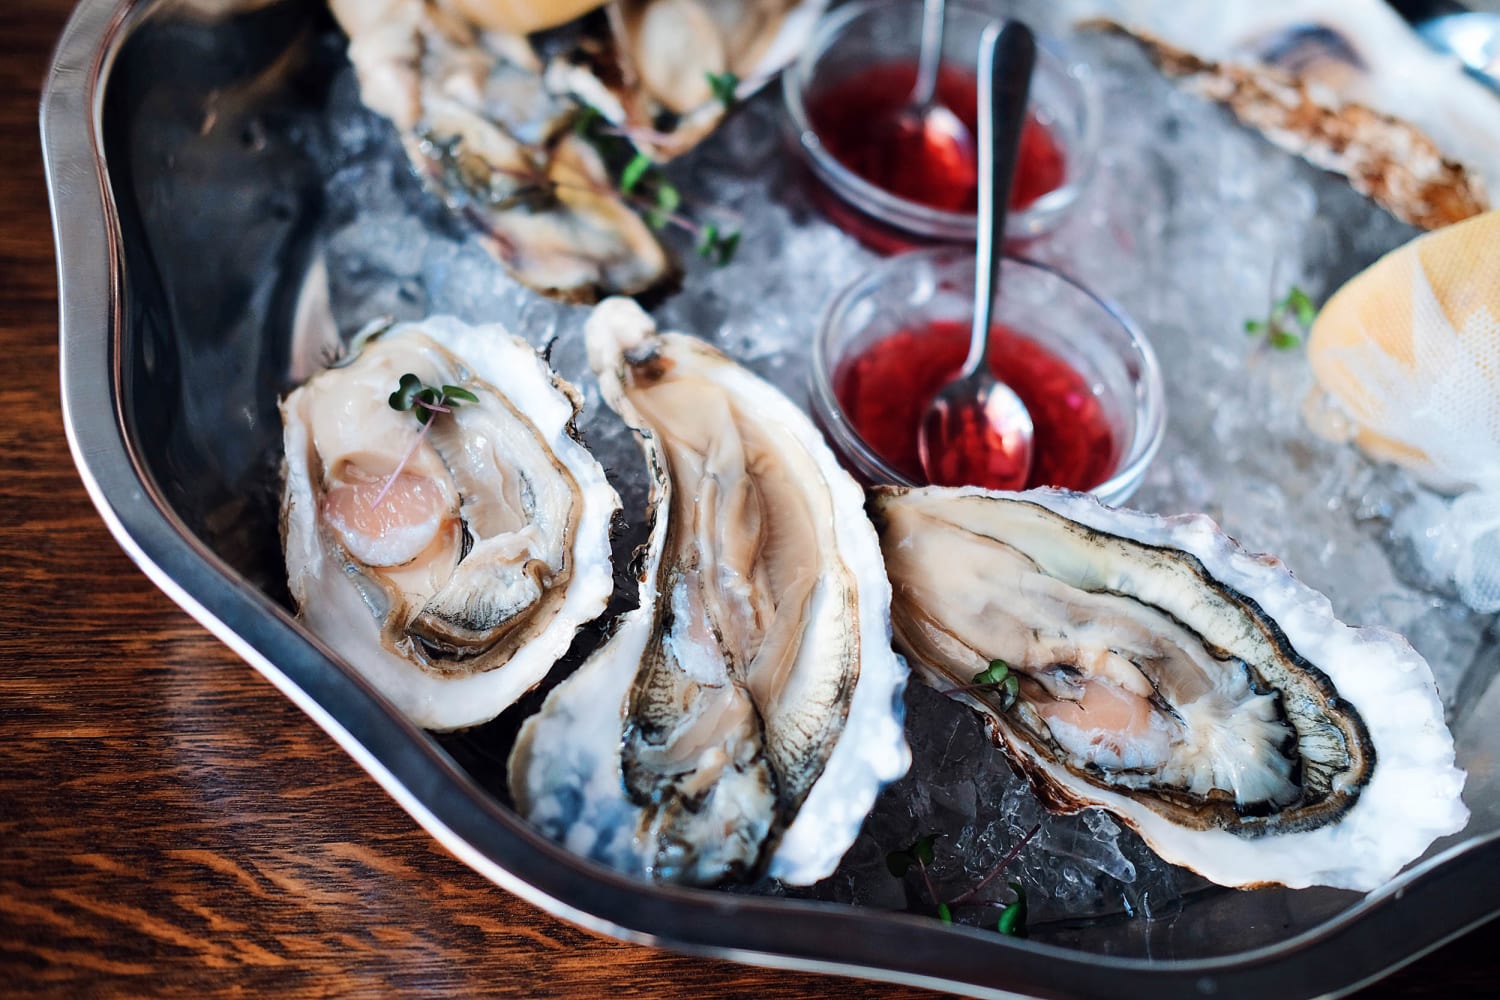 How can you tell if an oyster is safe to eat?